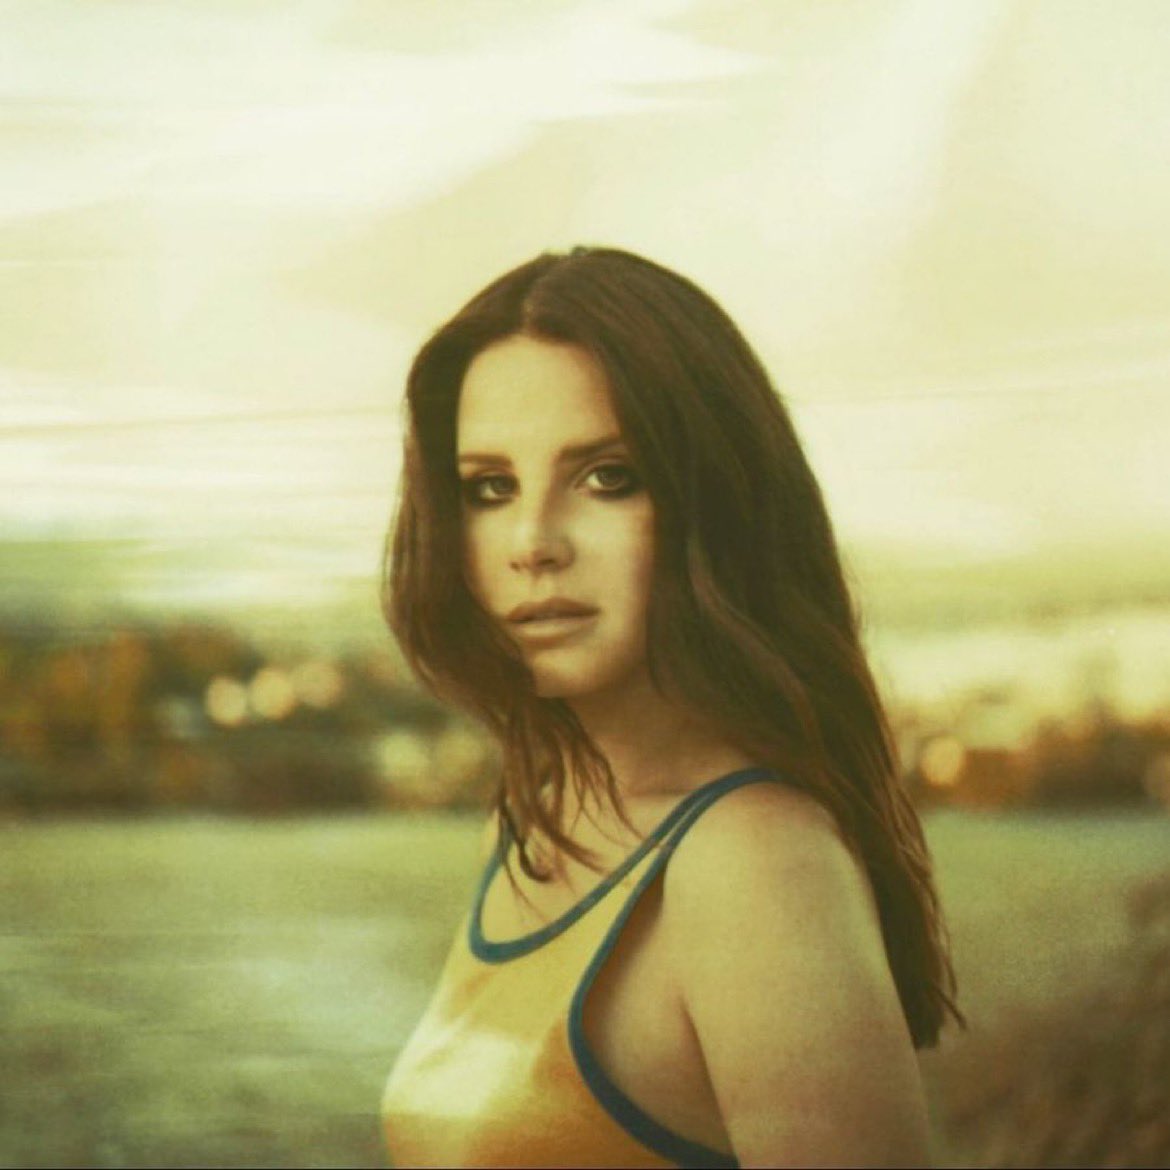 Lana Del Rey looks stunning in a new 'Ultraviolence' outtake photoshoot.